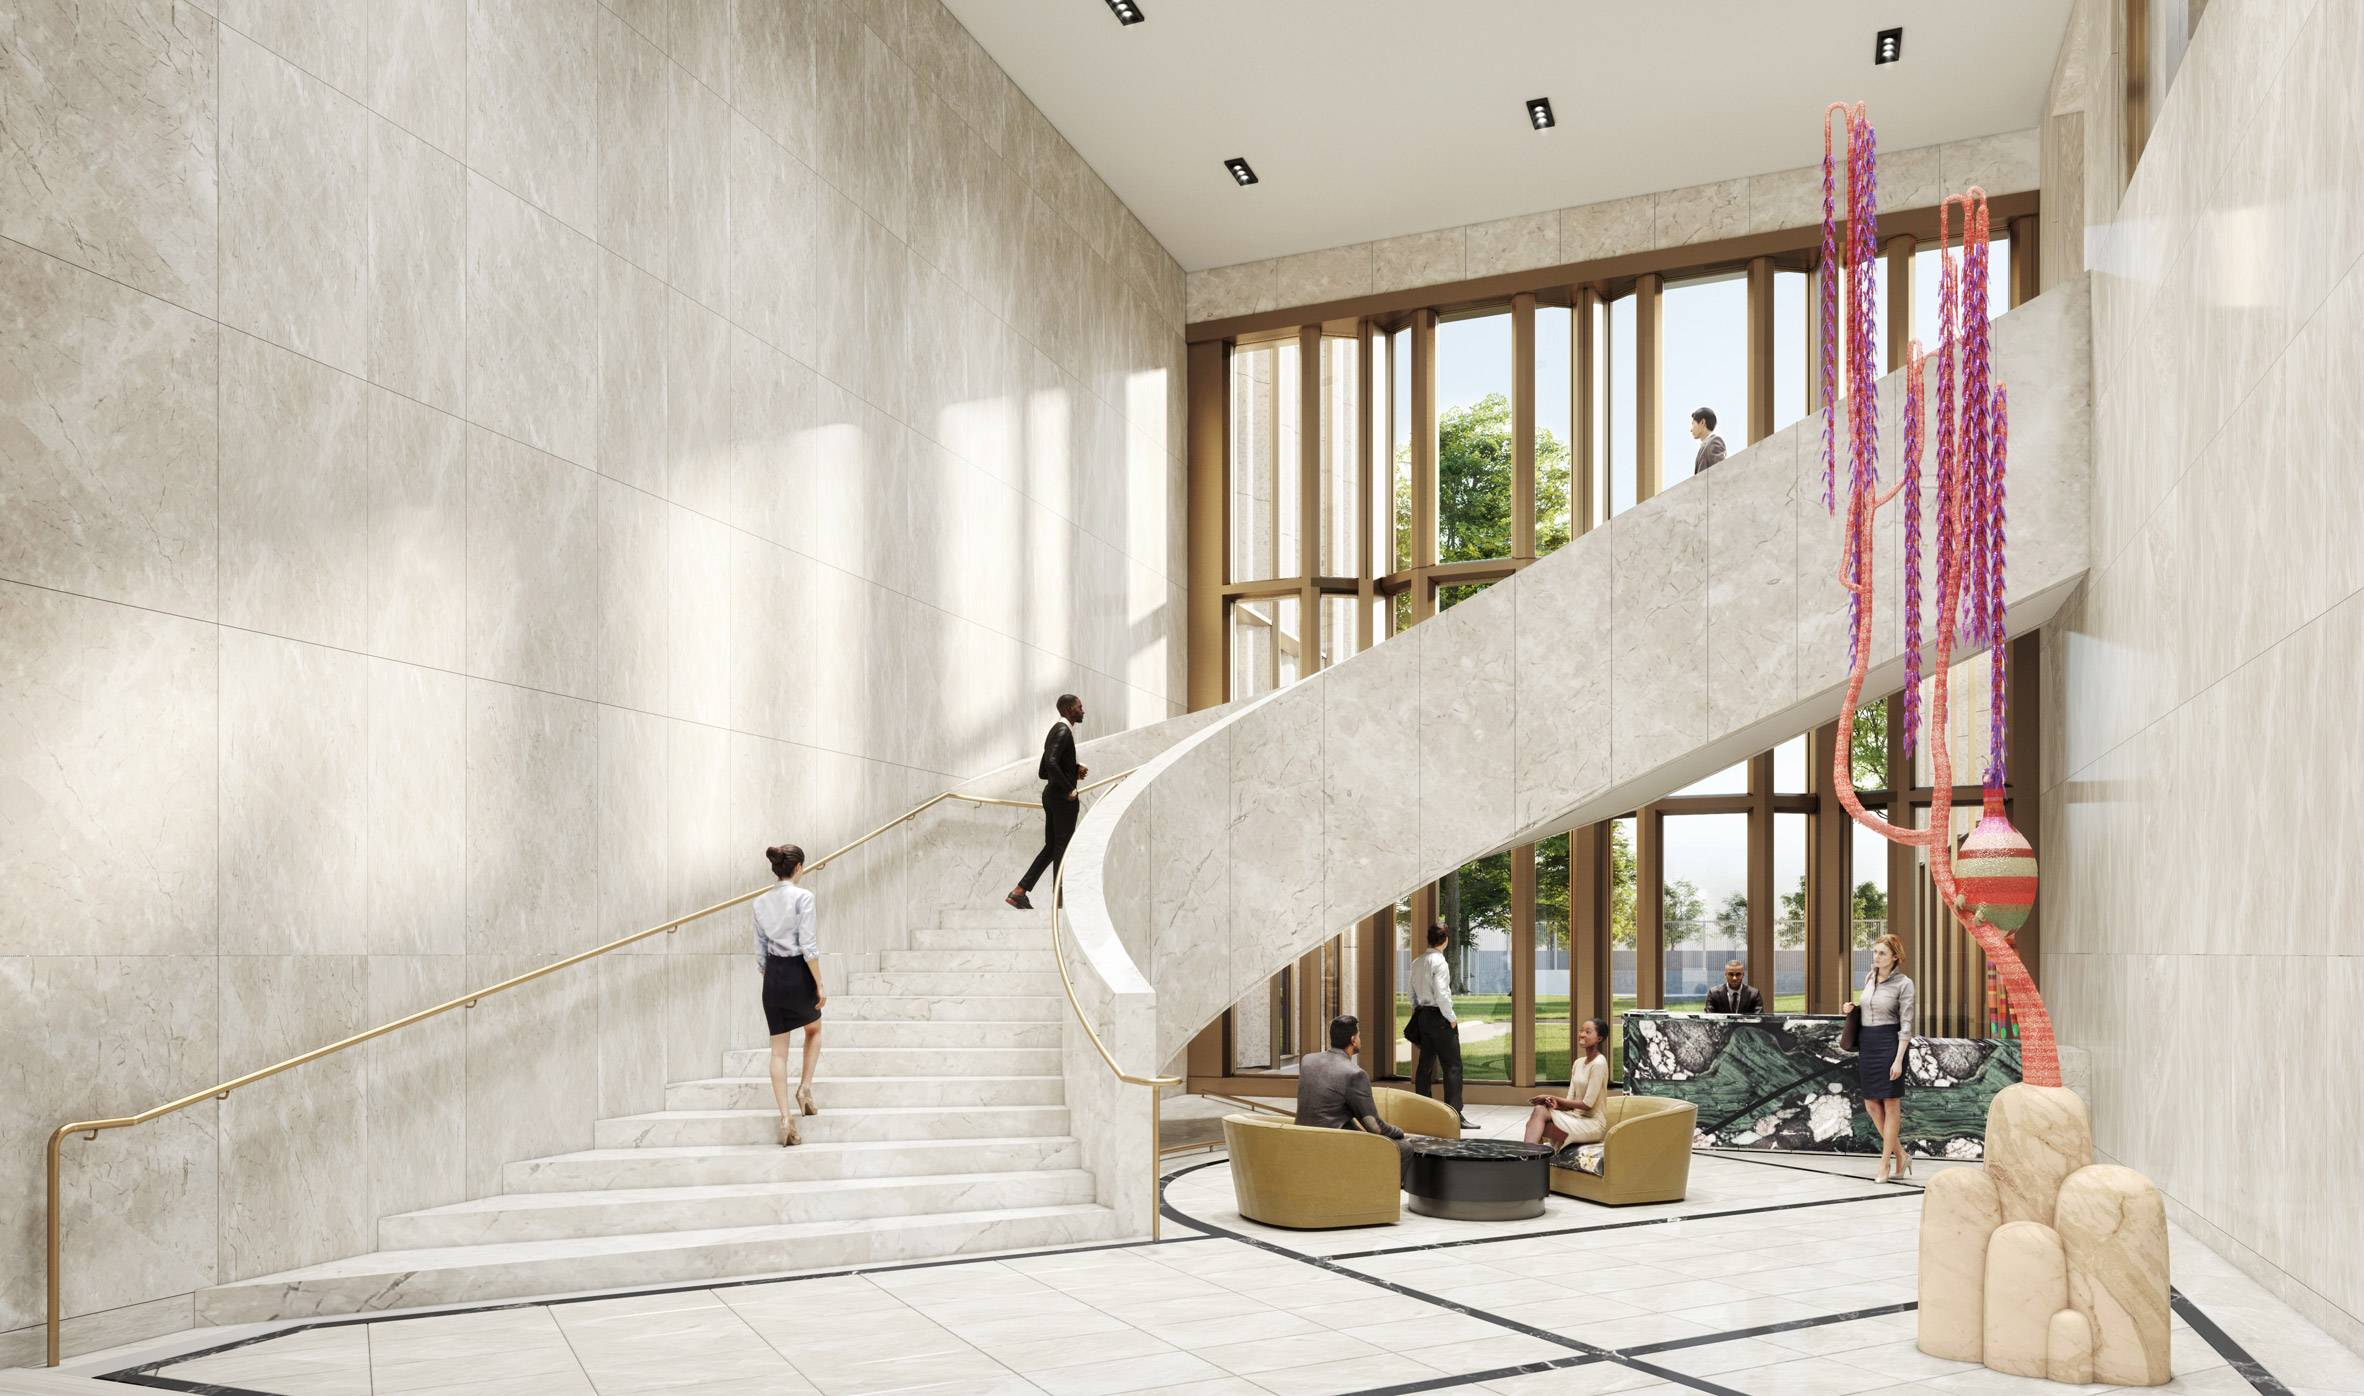 Interior render of the stone-lined lobby area at the office building